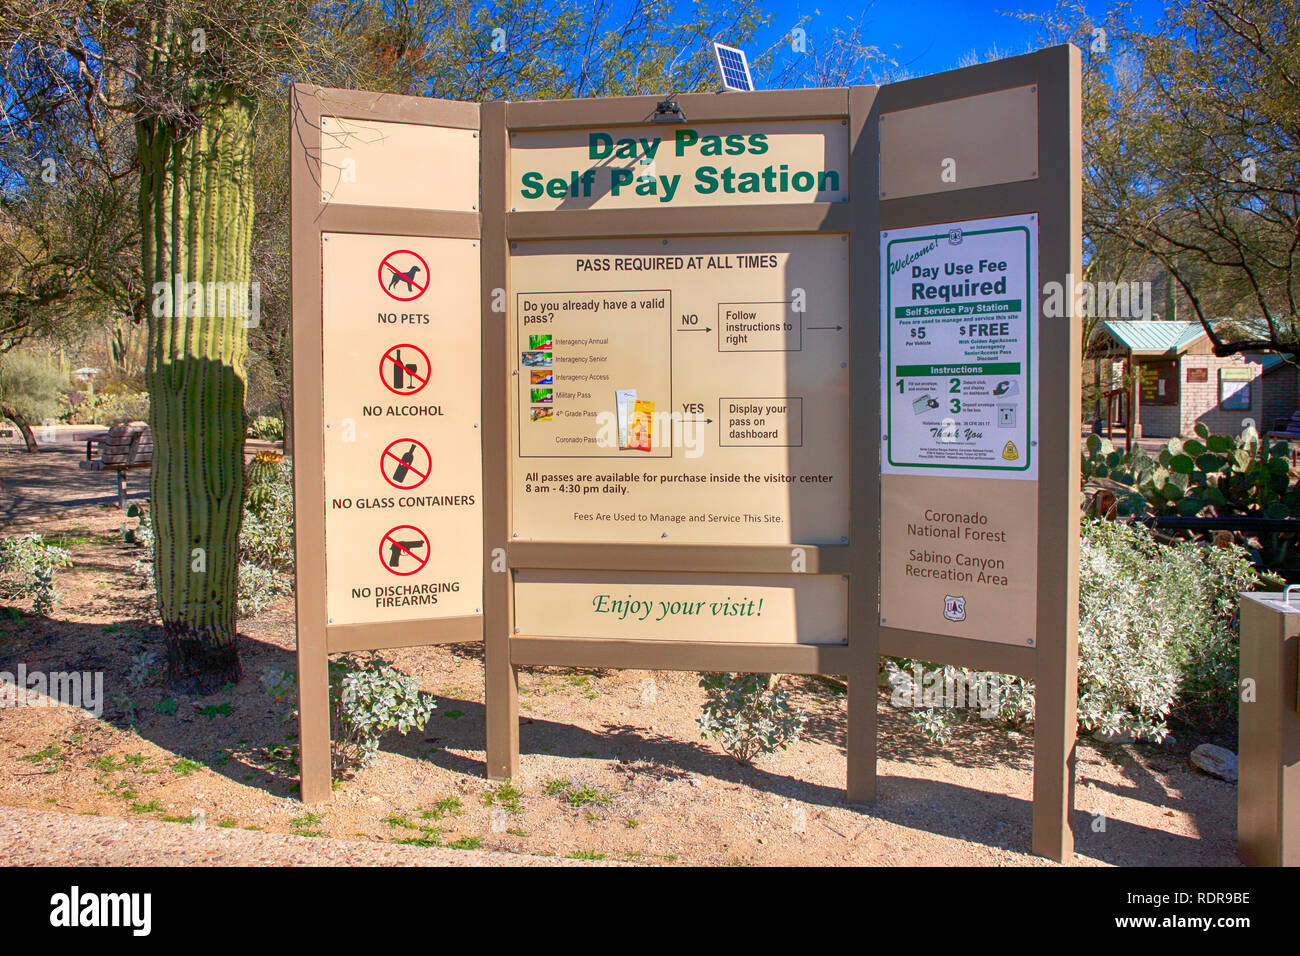 Sabino Canyon National Forest information sign in Tucson Arizona Banque D'Images